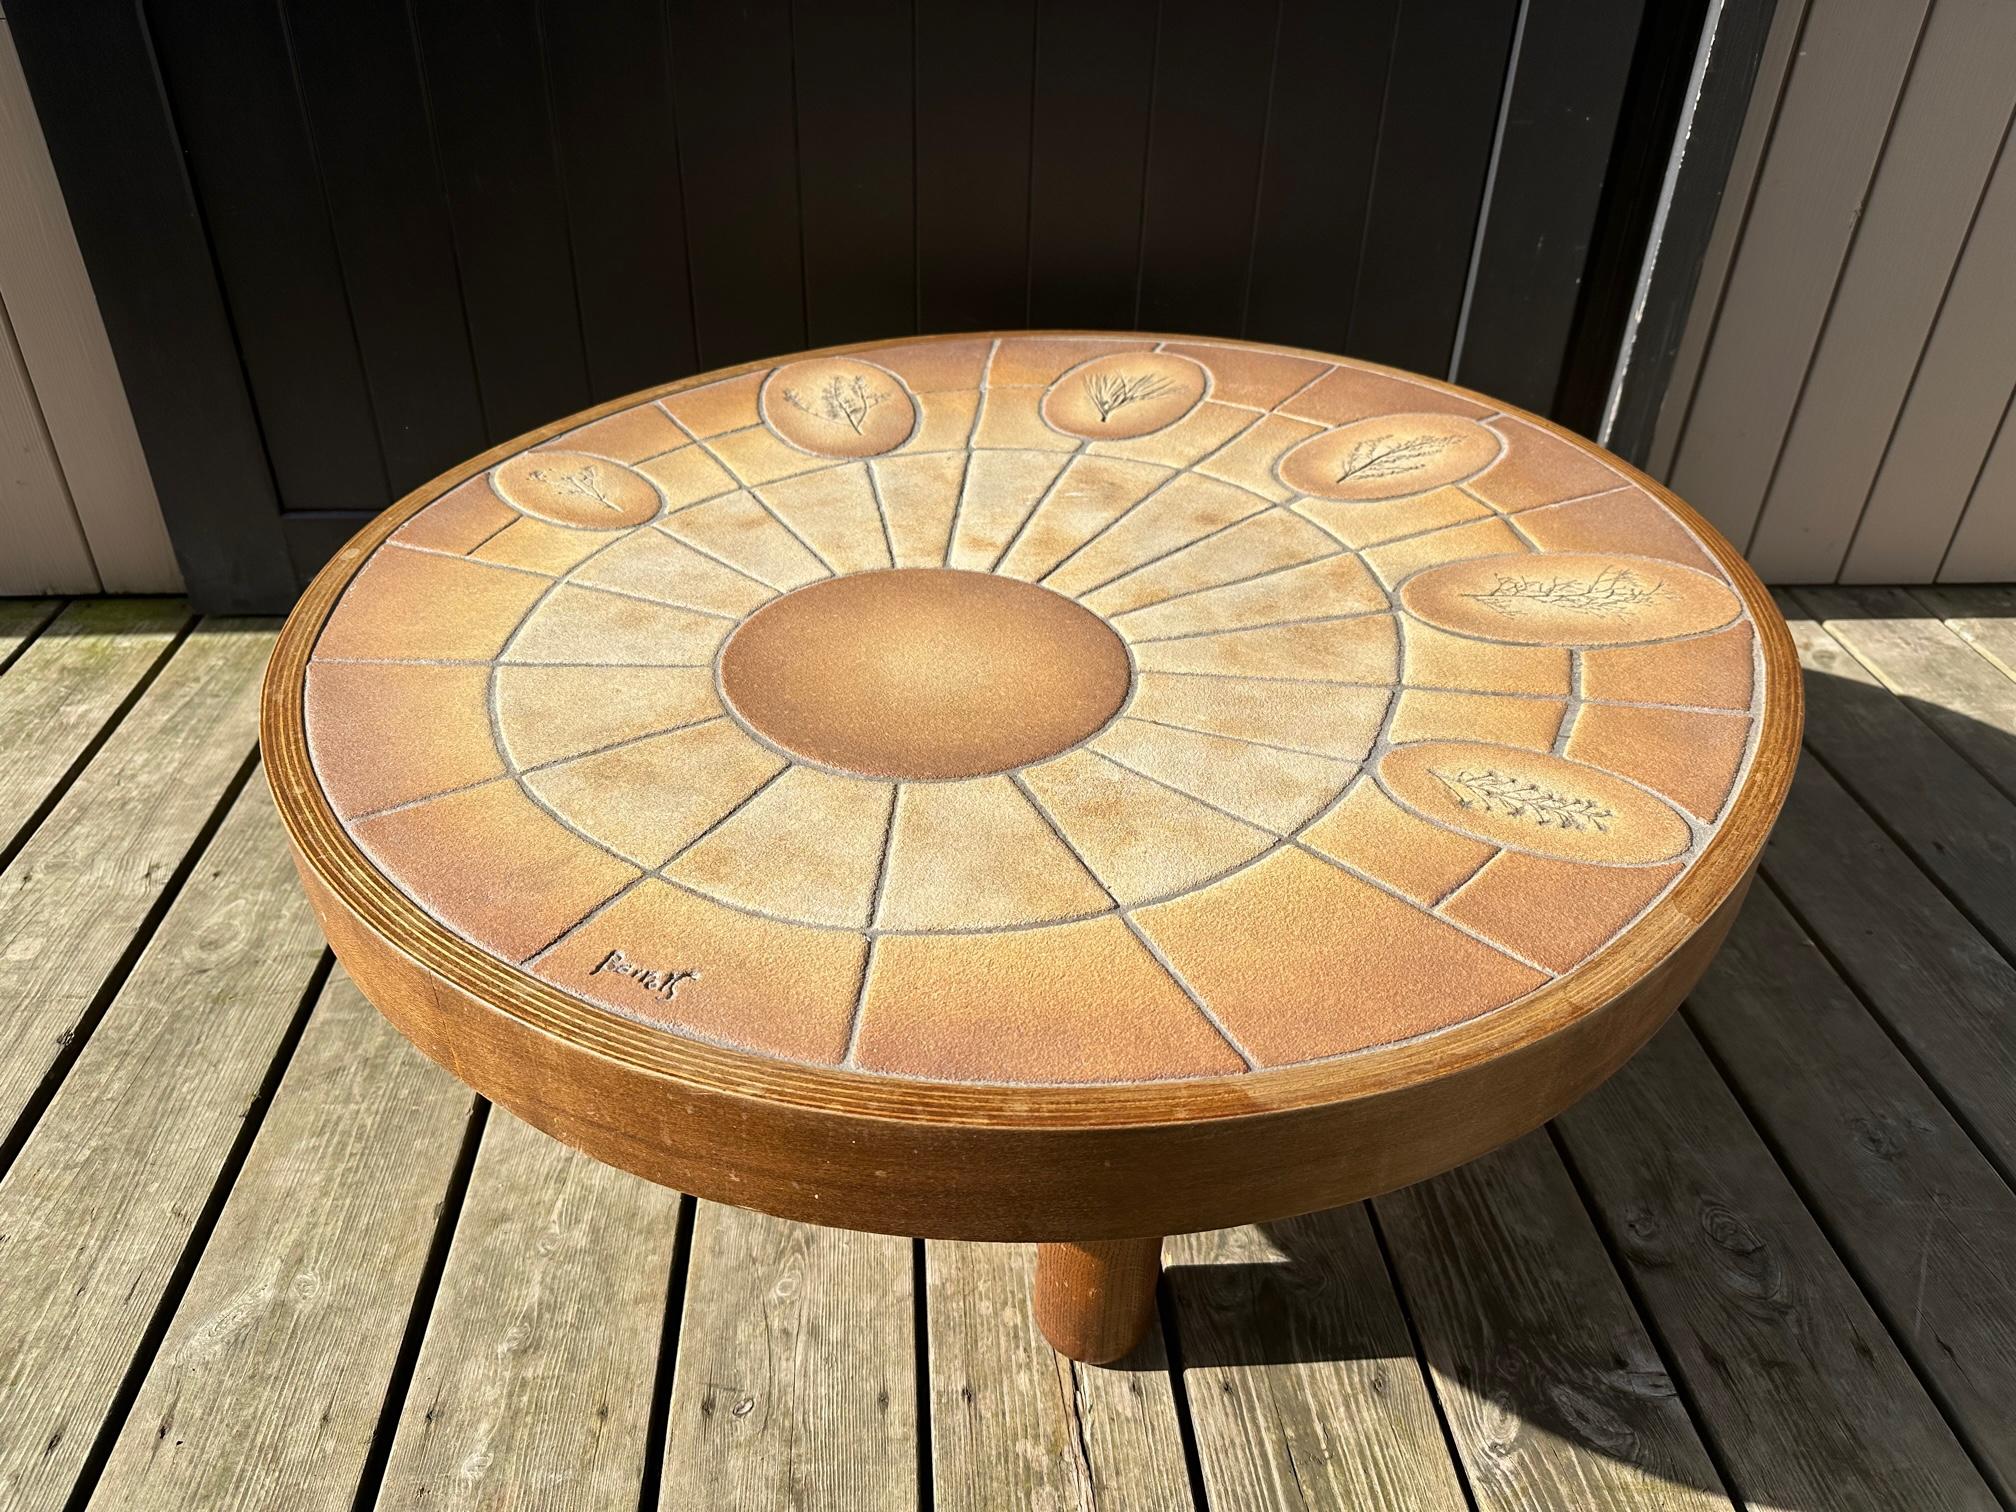 20th century French Vallauris Ceramic and Oak Coffee Table, 1960s For Sale 1